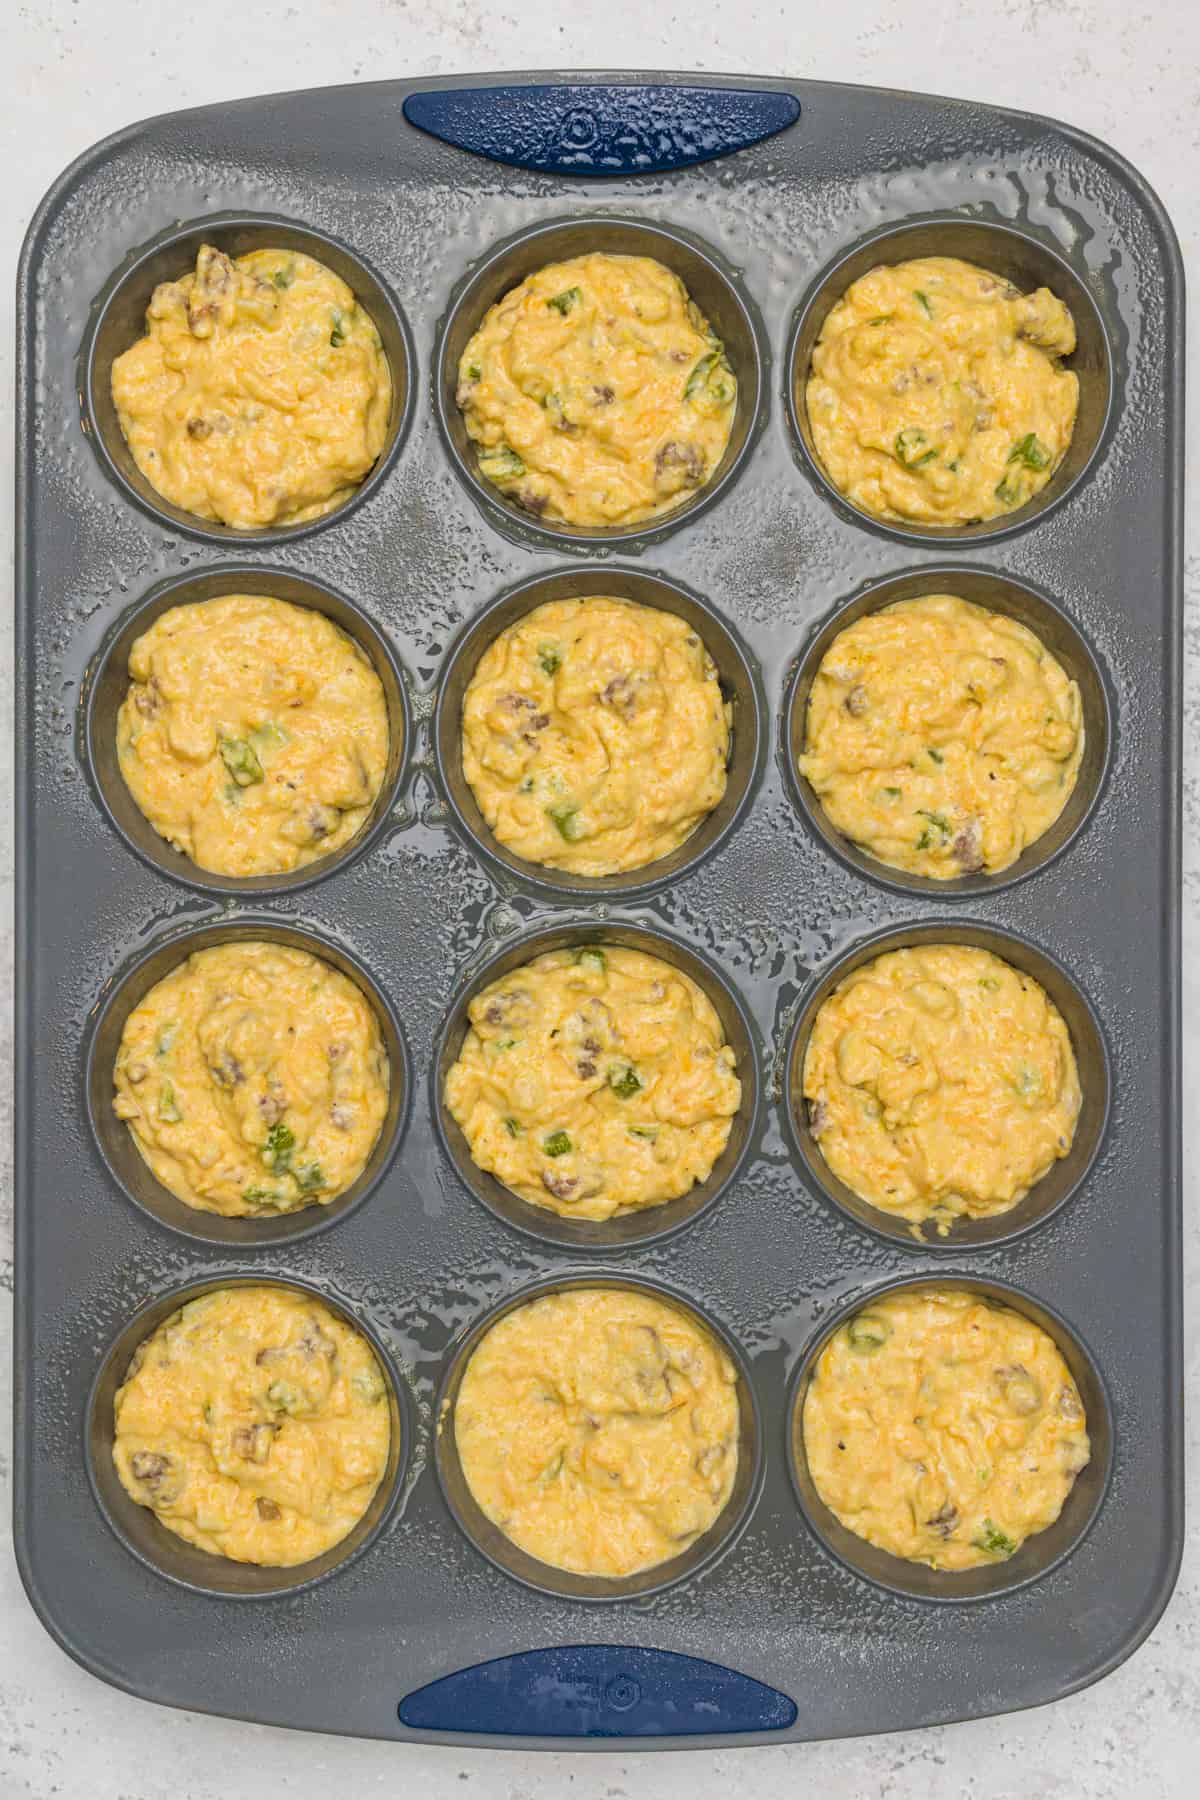 Muffin tin sprayed with cooking spray and holding uncooked Savory Breakfast Muffin mix in each cup ready to be baked.